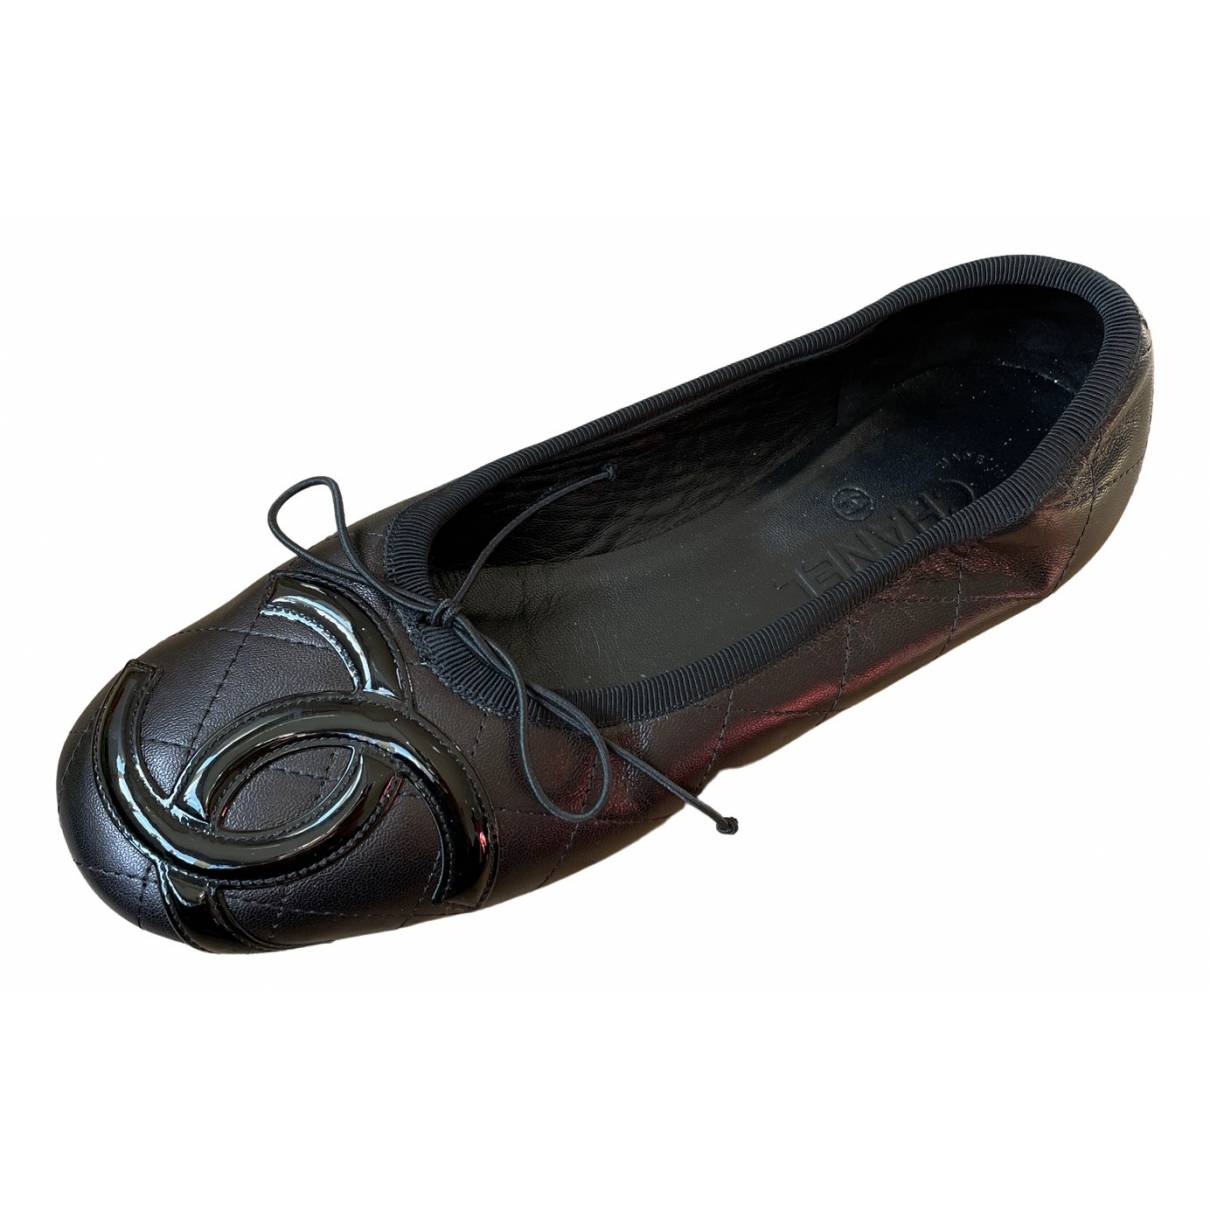 Leather ballet flats Chanel Black size 38 EU in Leather - 24895458